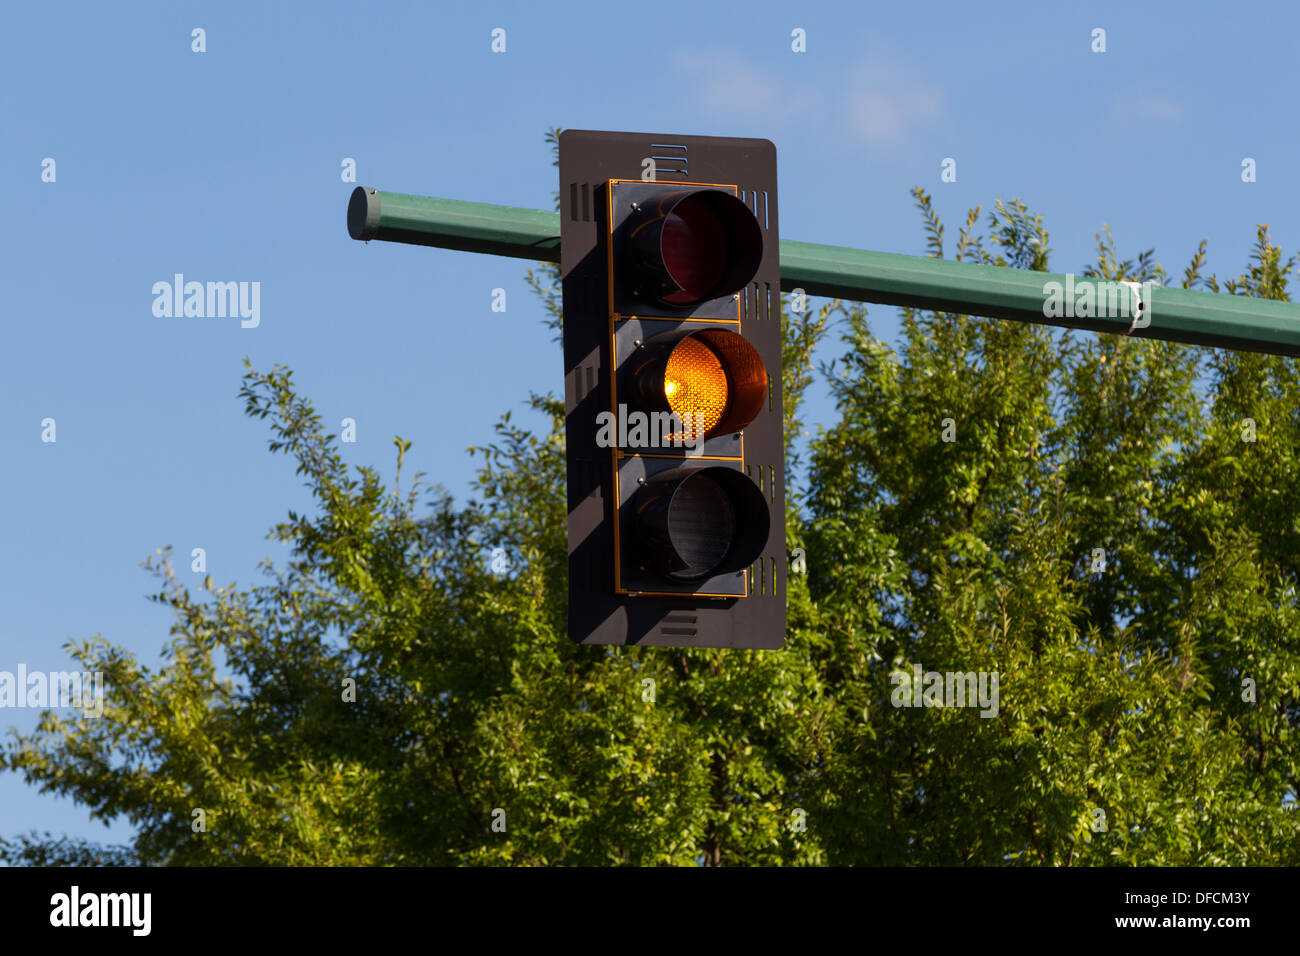 Traffic signal, orange light, amber light, or traffic light.  Blue sky and green trees in the background Stock Photo